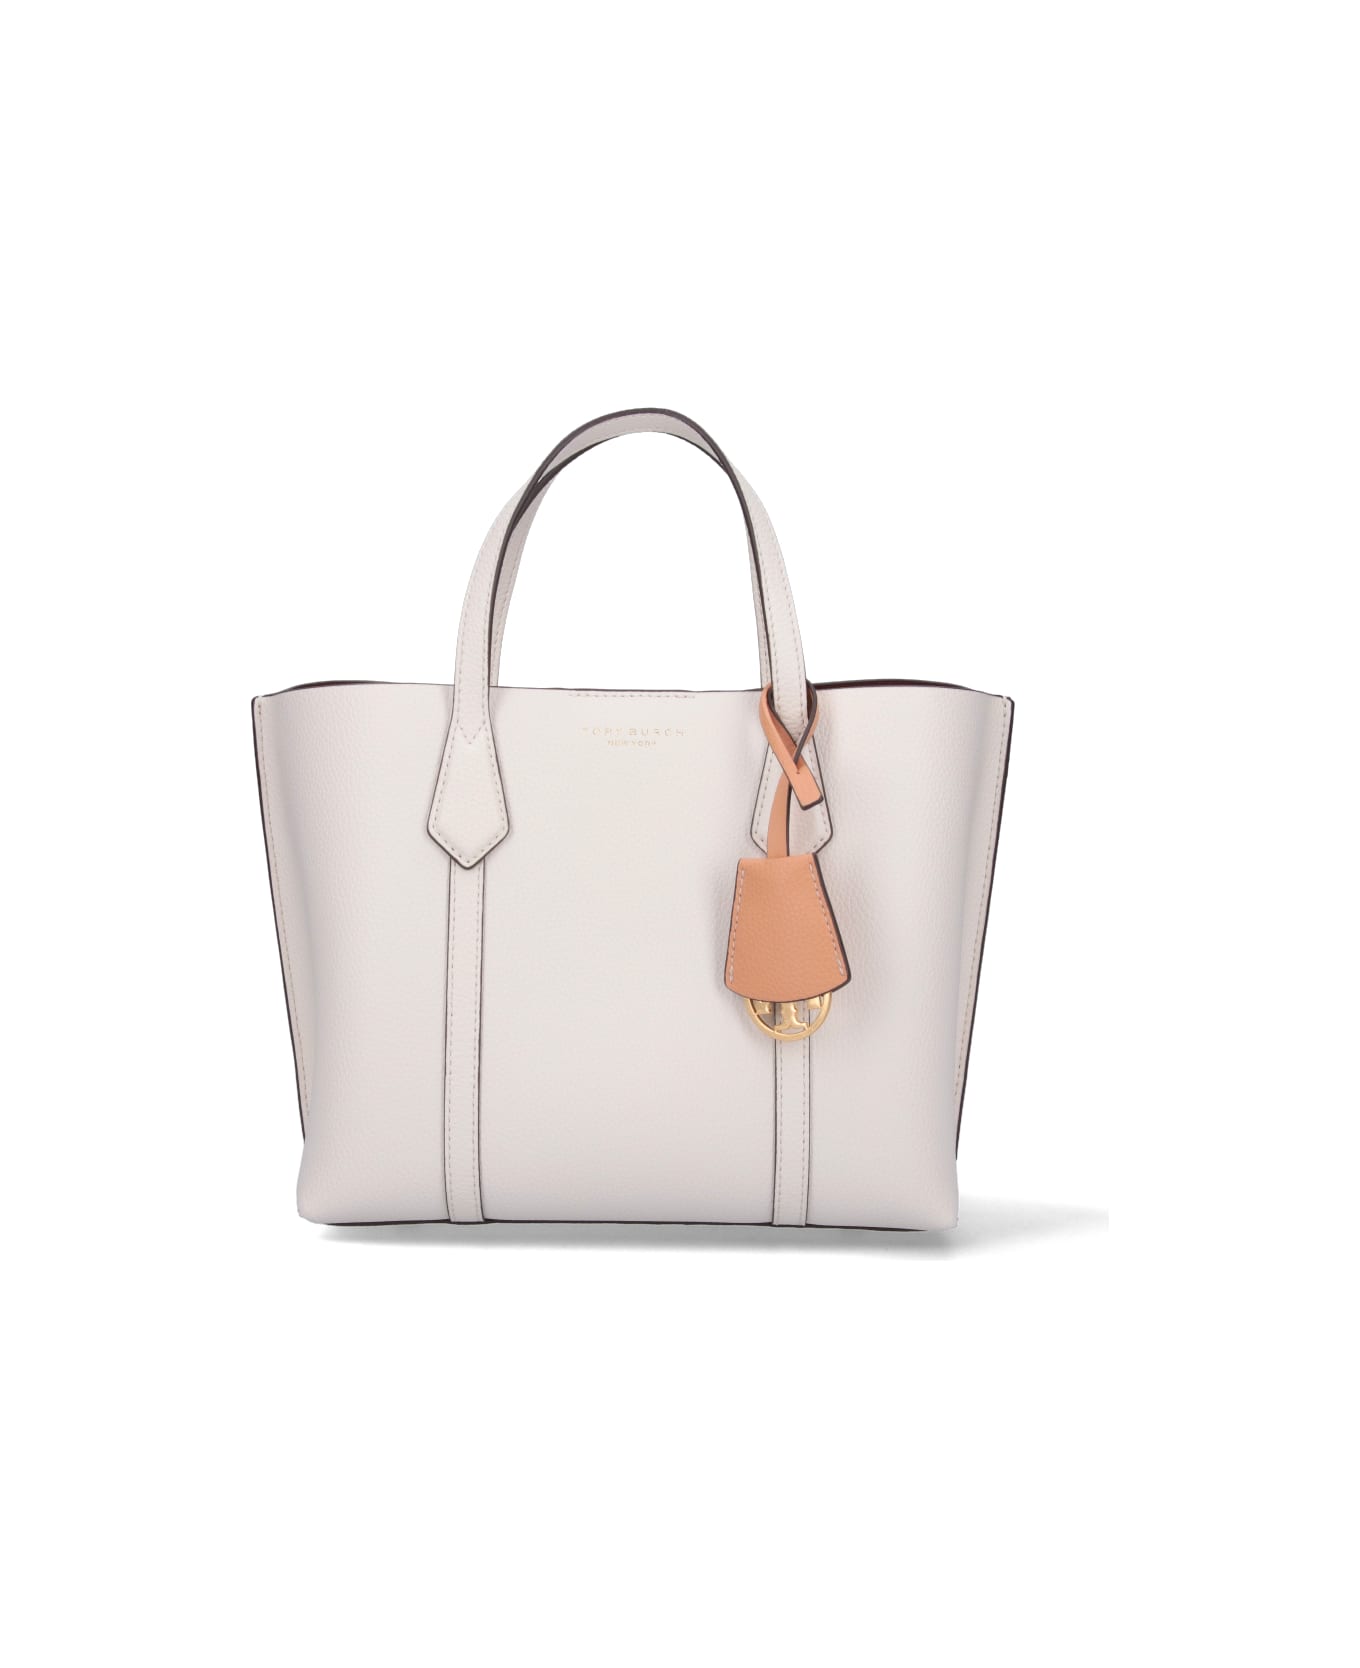 Tory Burch 'perry' Small Tote Bag - White